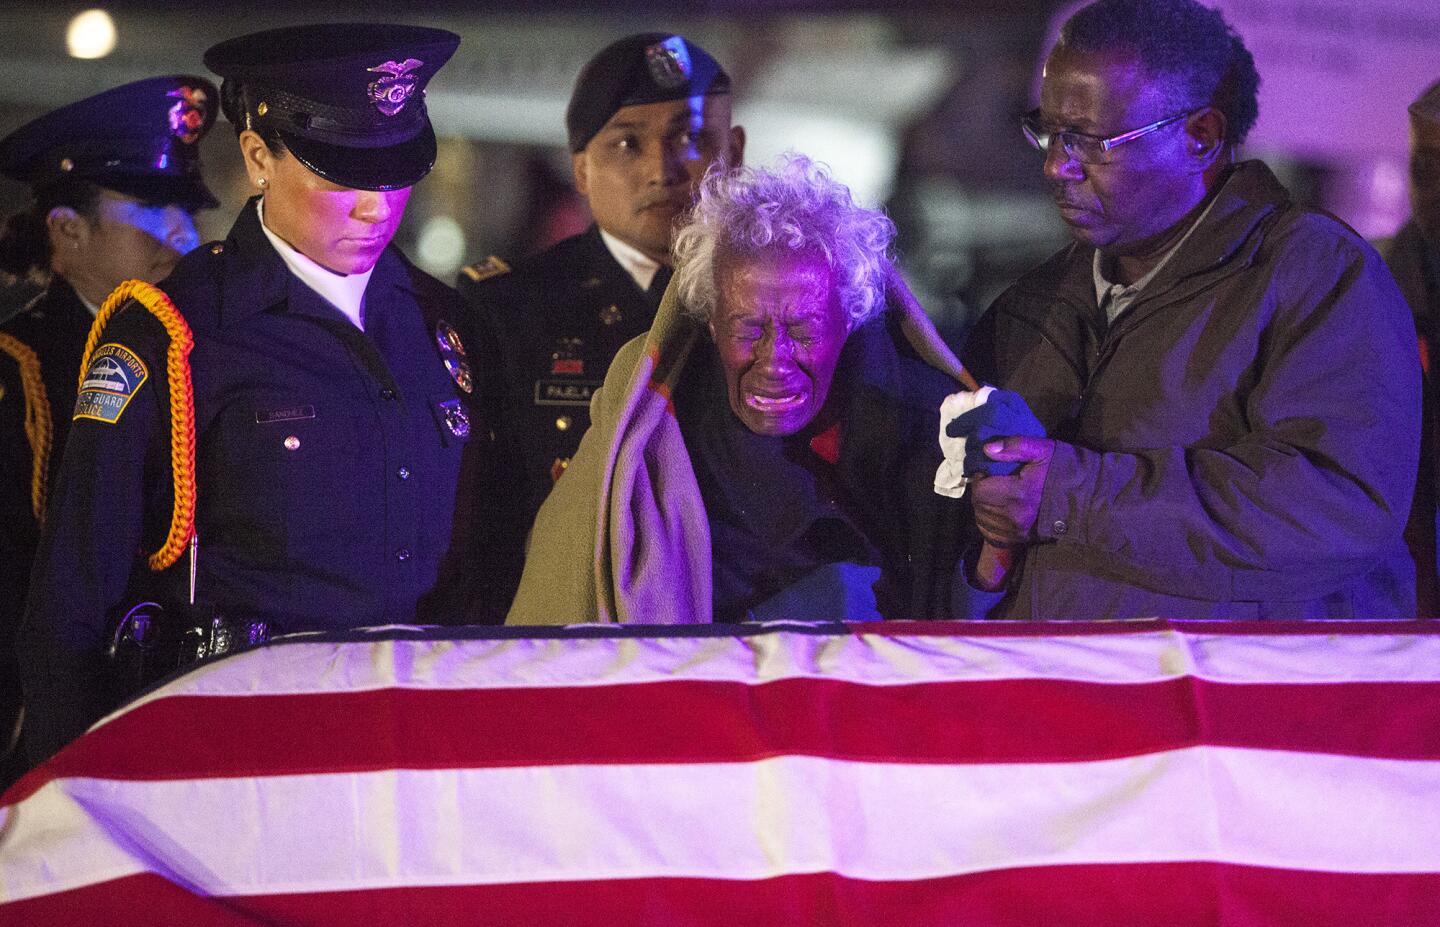 Clara Gantt, the 94-year-old widow of U.S. Army Sgt. Joseph Gantt, weeps in front of her husband's casket at Los Angeles International Airport.